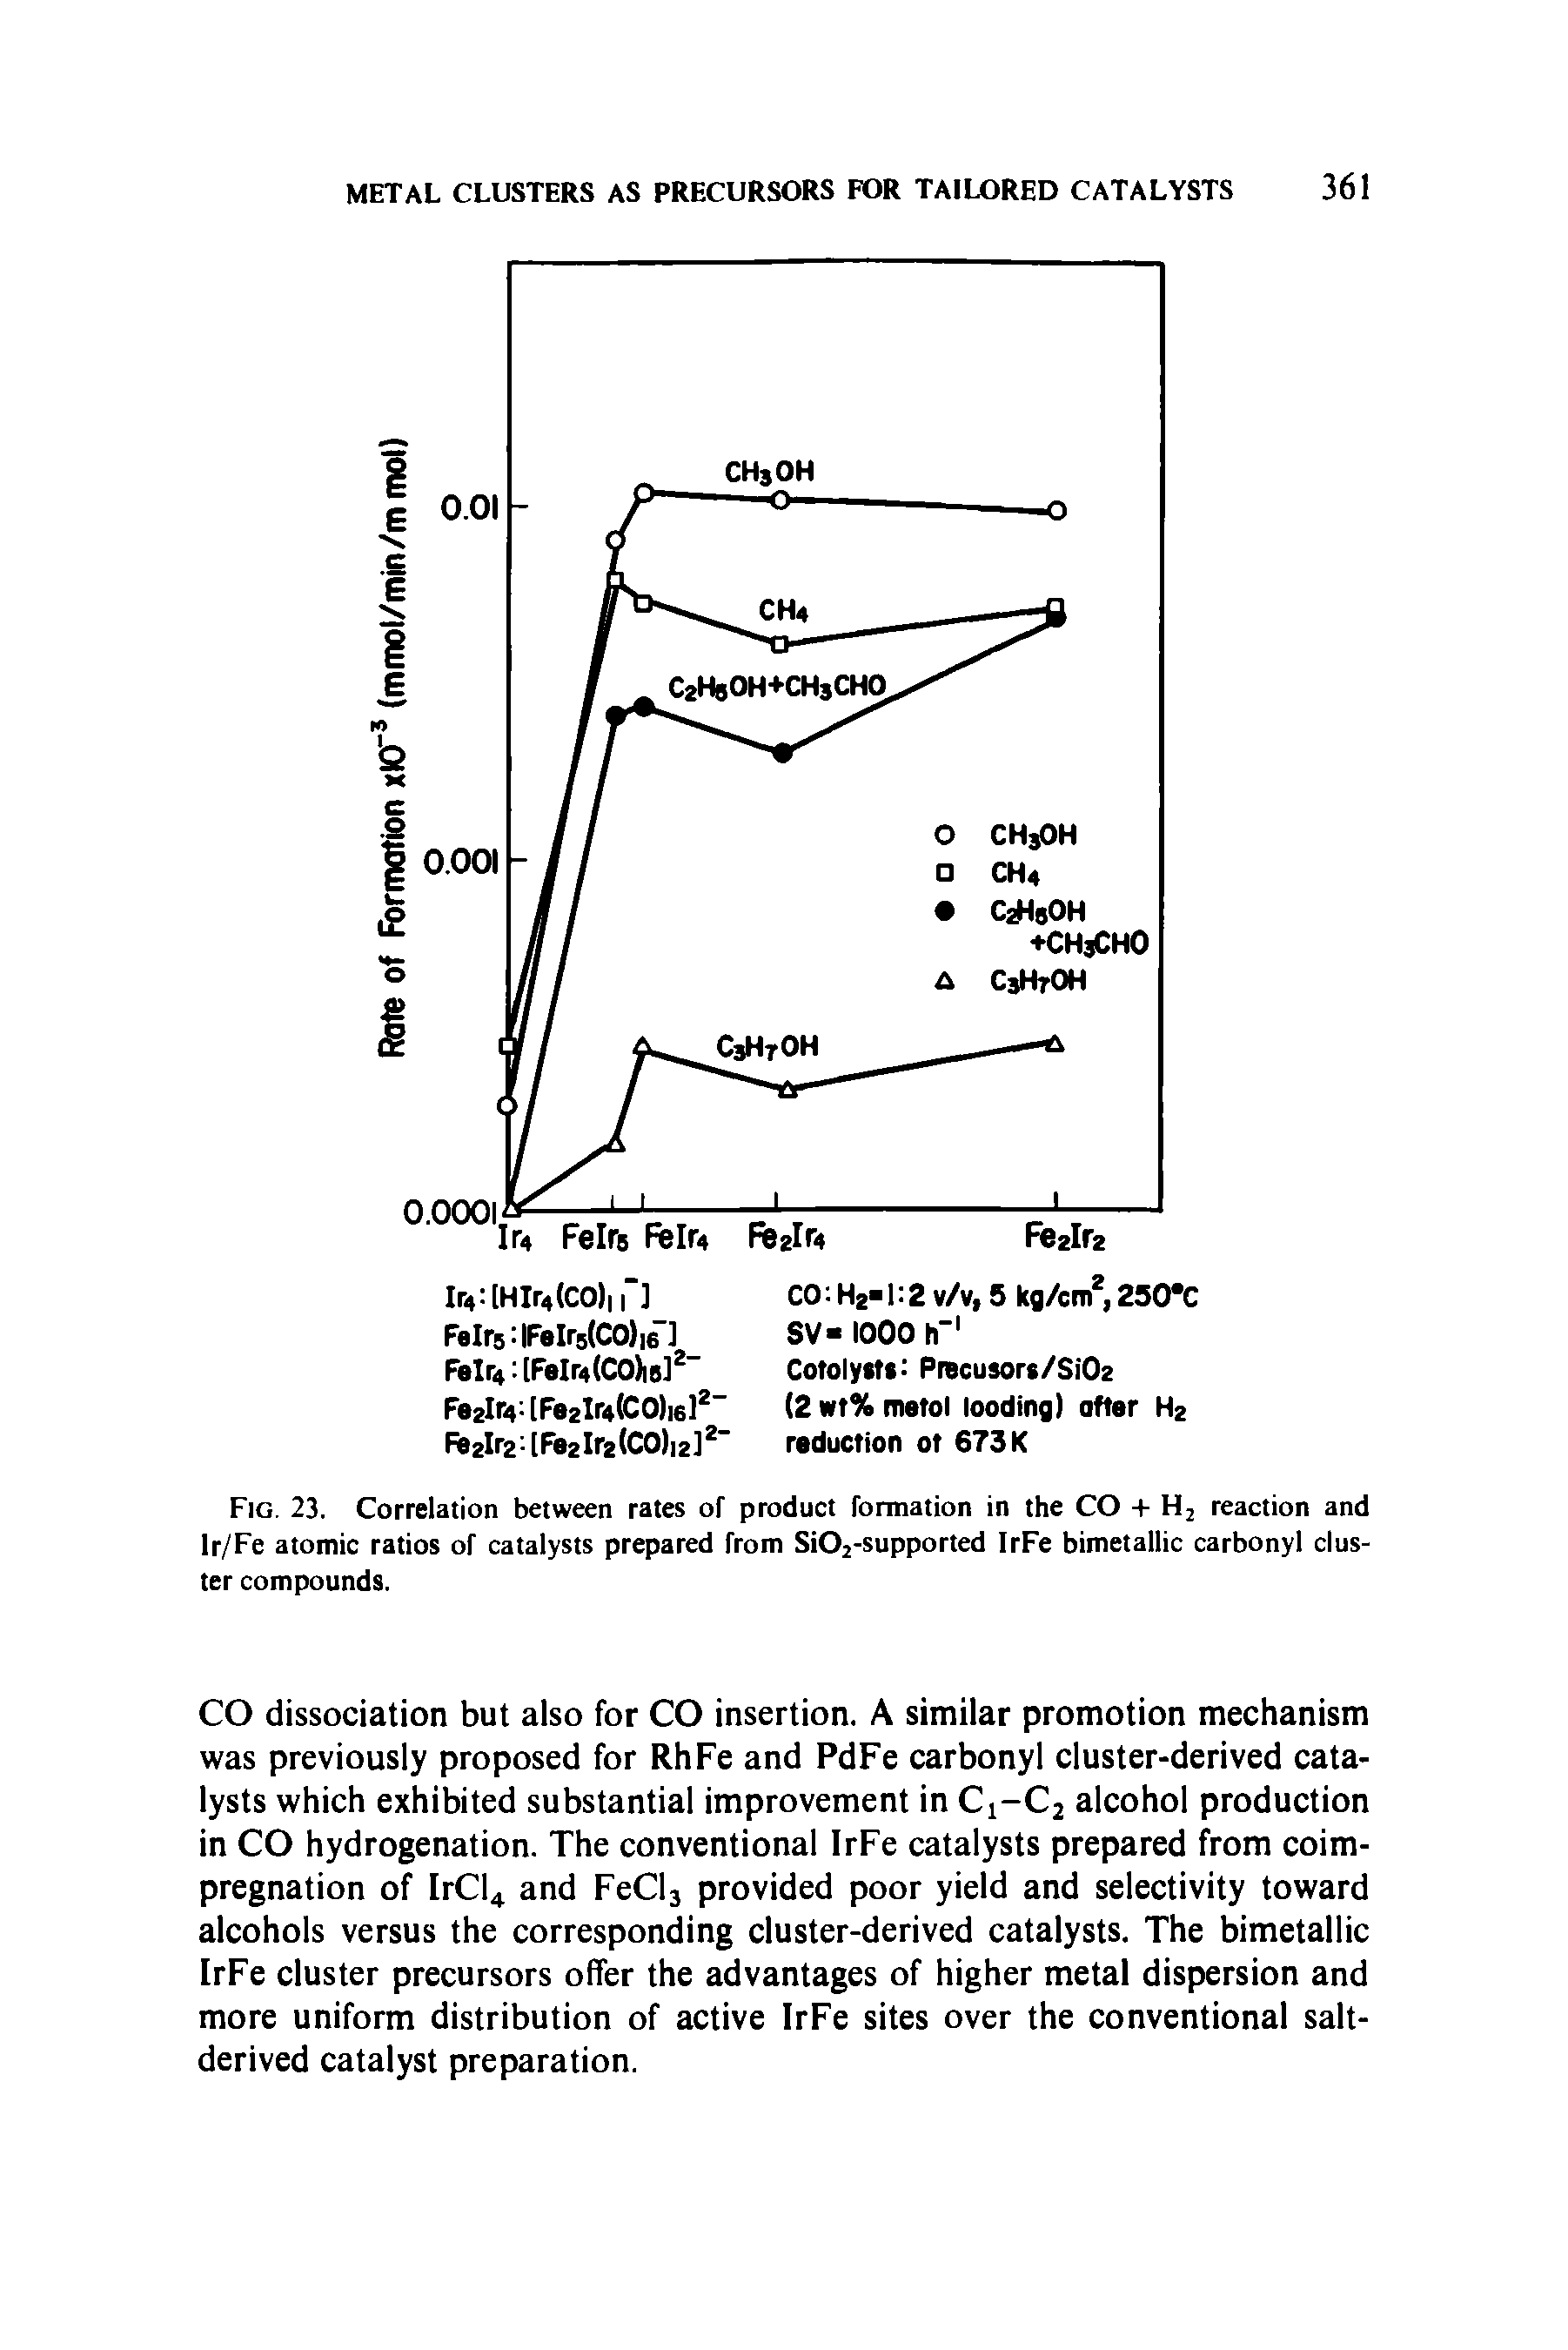 Fig. 23. Correlation between rates of product formation in the CO + Hj reaction and Ir/Fe atomic ratios of catalysts prepared from Si02-supported IrFe bimetallic carbonyl cluster compounds.